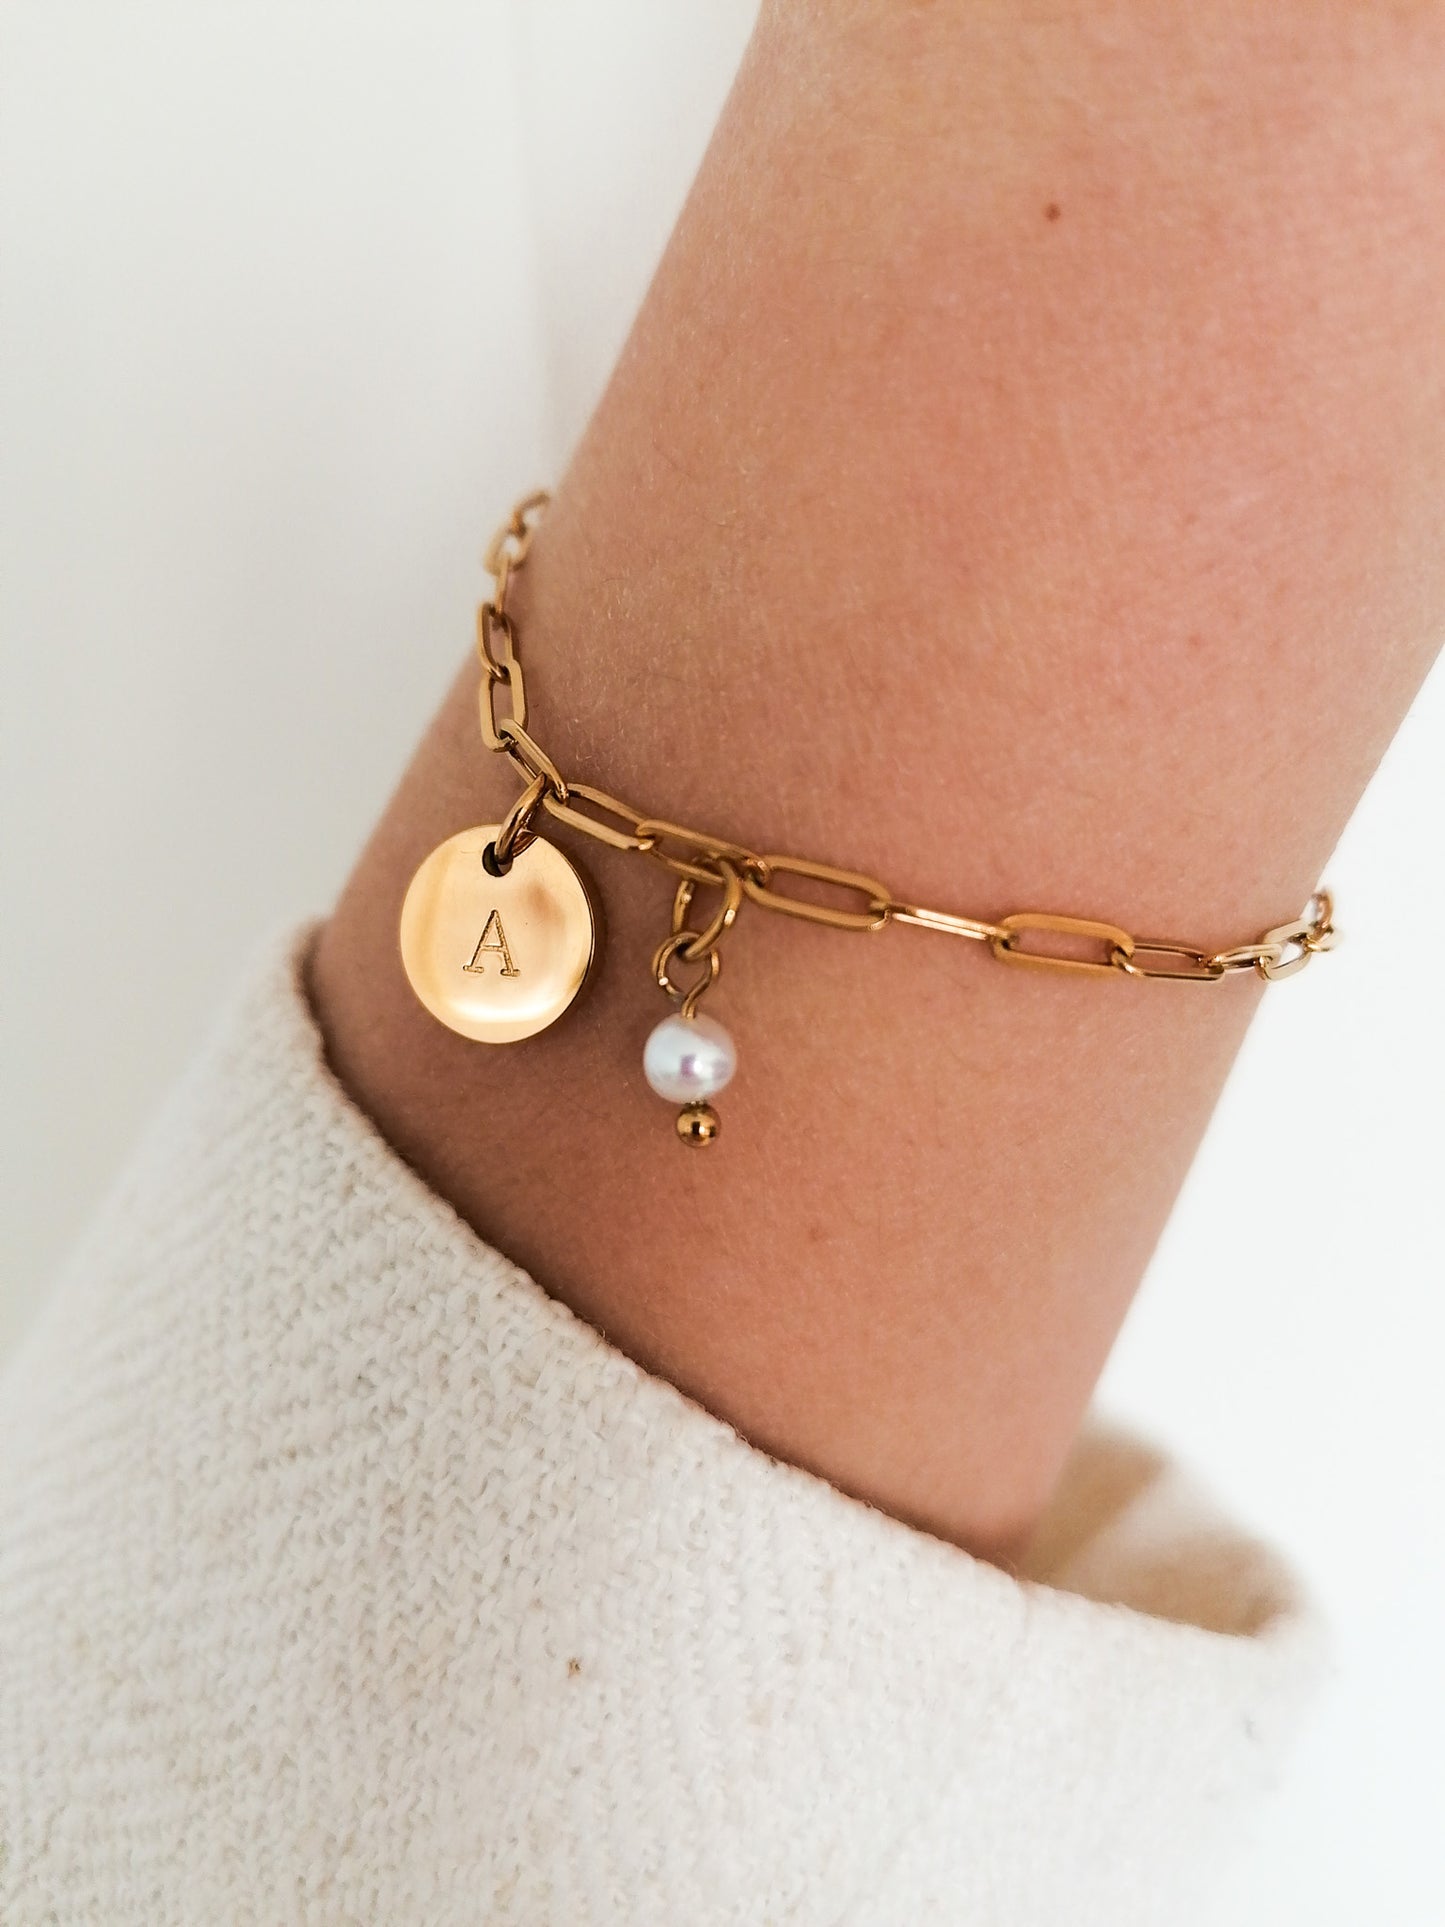 Initial bracelet with pearl